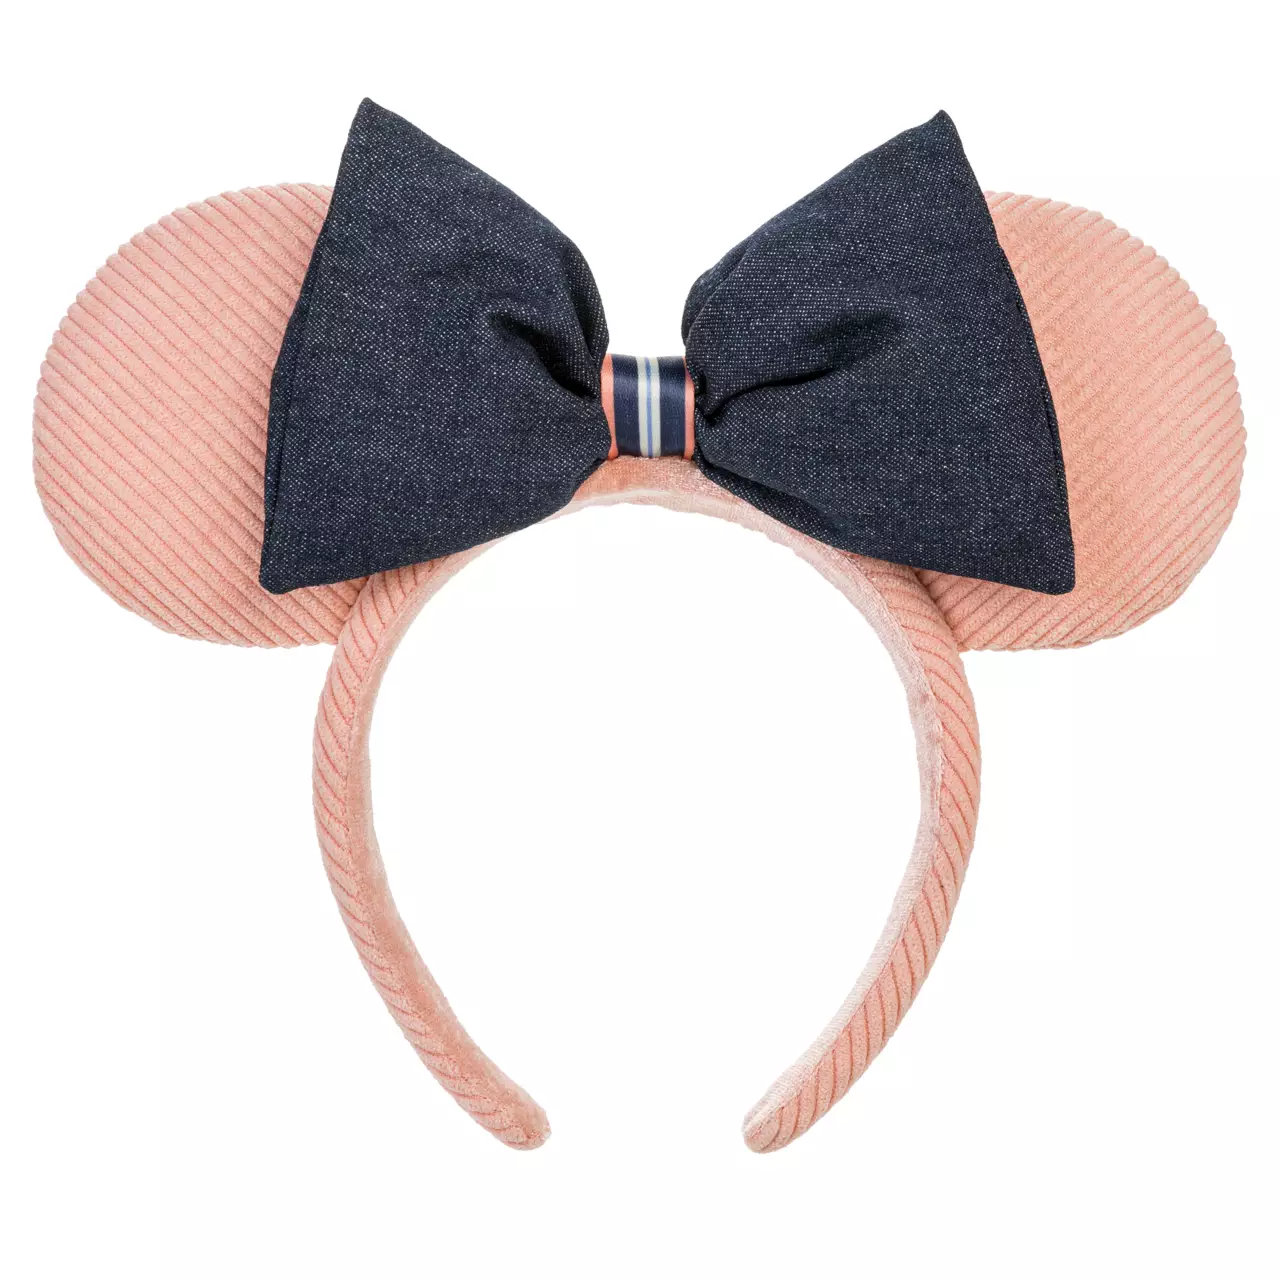 Minnie Mouse Ears – Denim and Corduroy